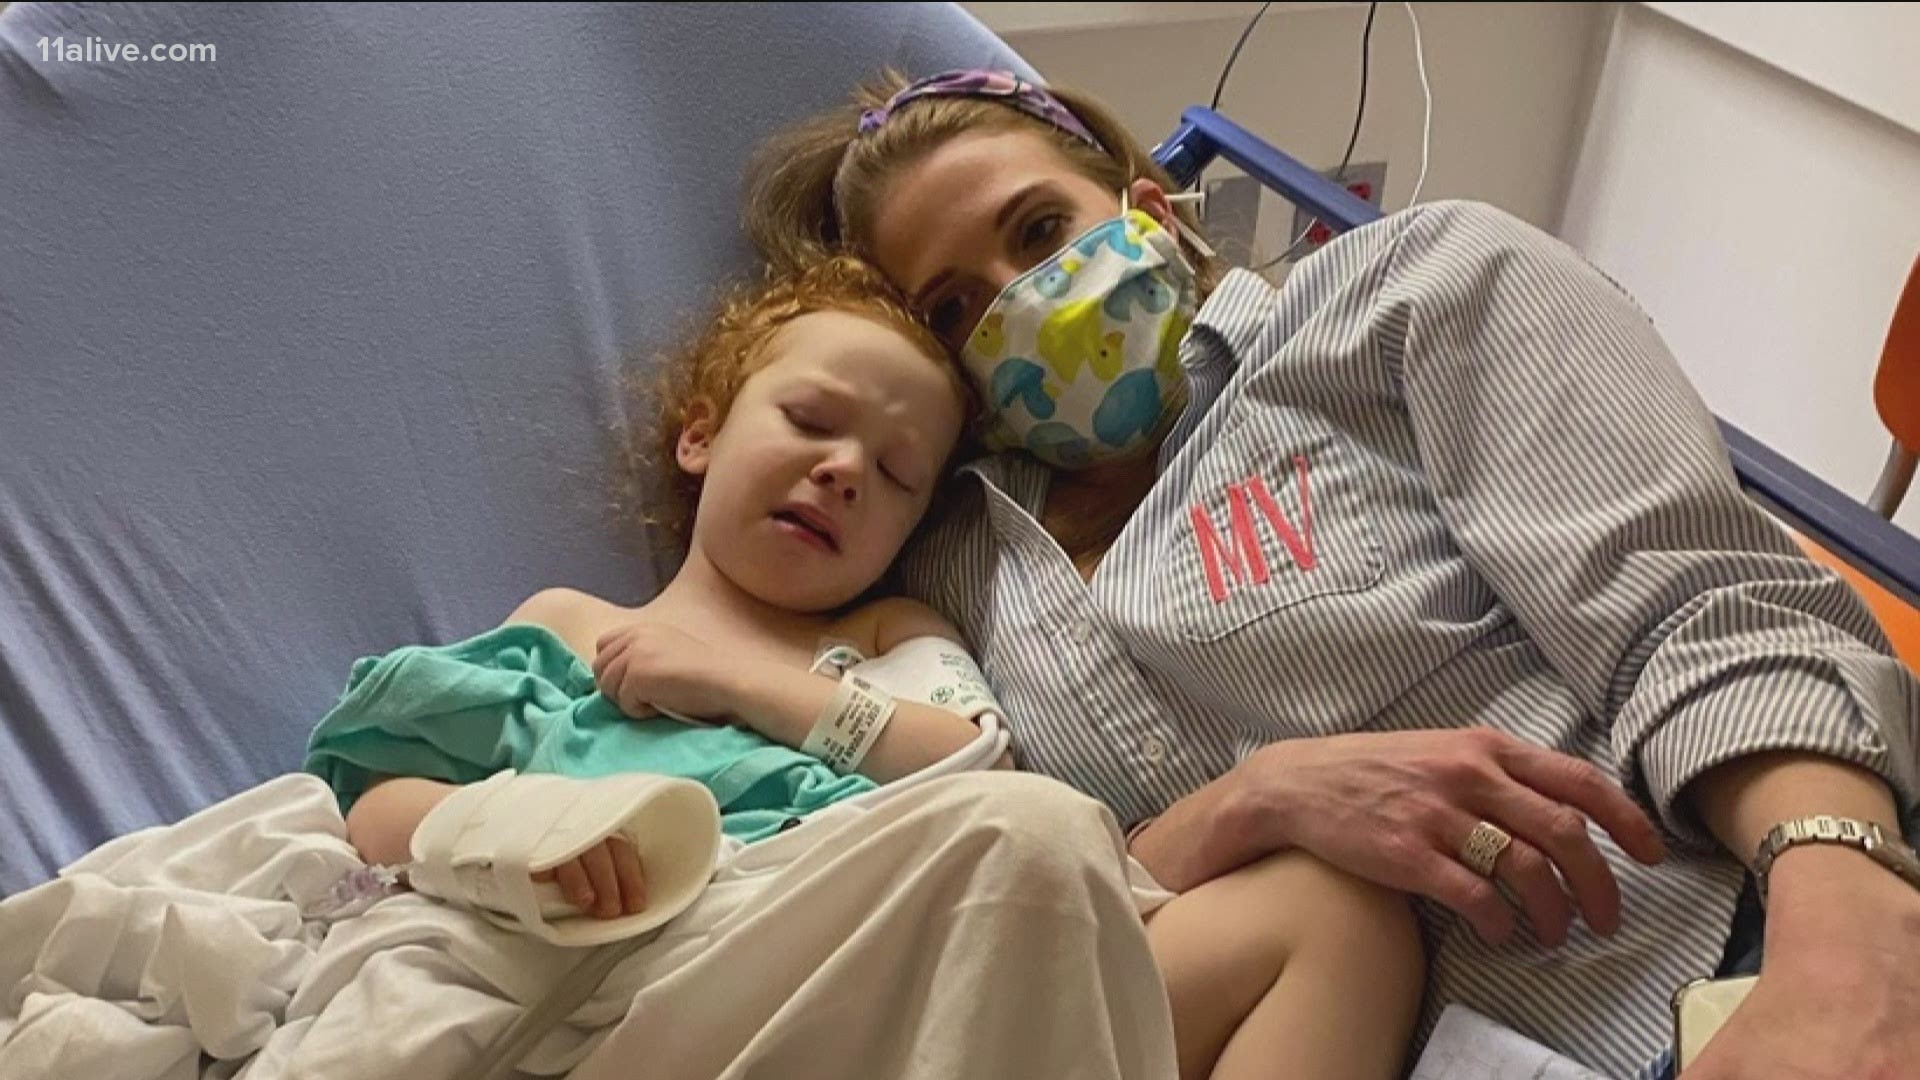 3-year-old Vivian is recovering after suffering a life threatening disease caused by COVID-19.